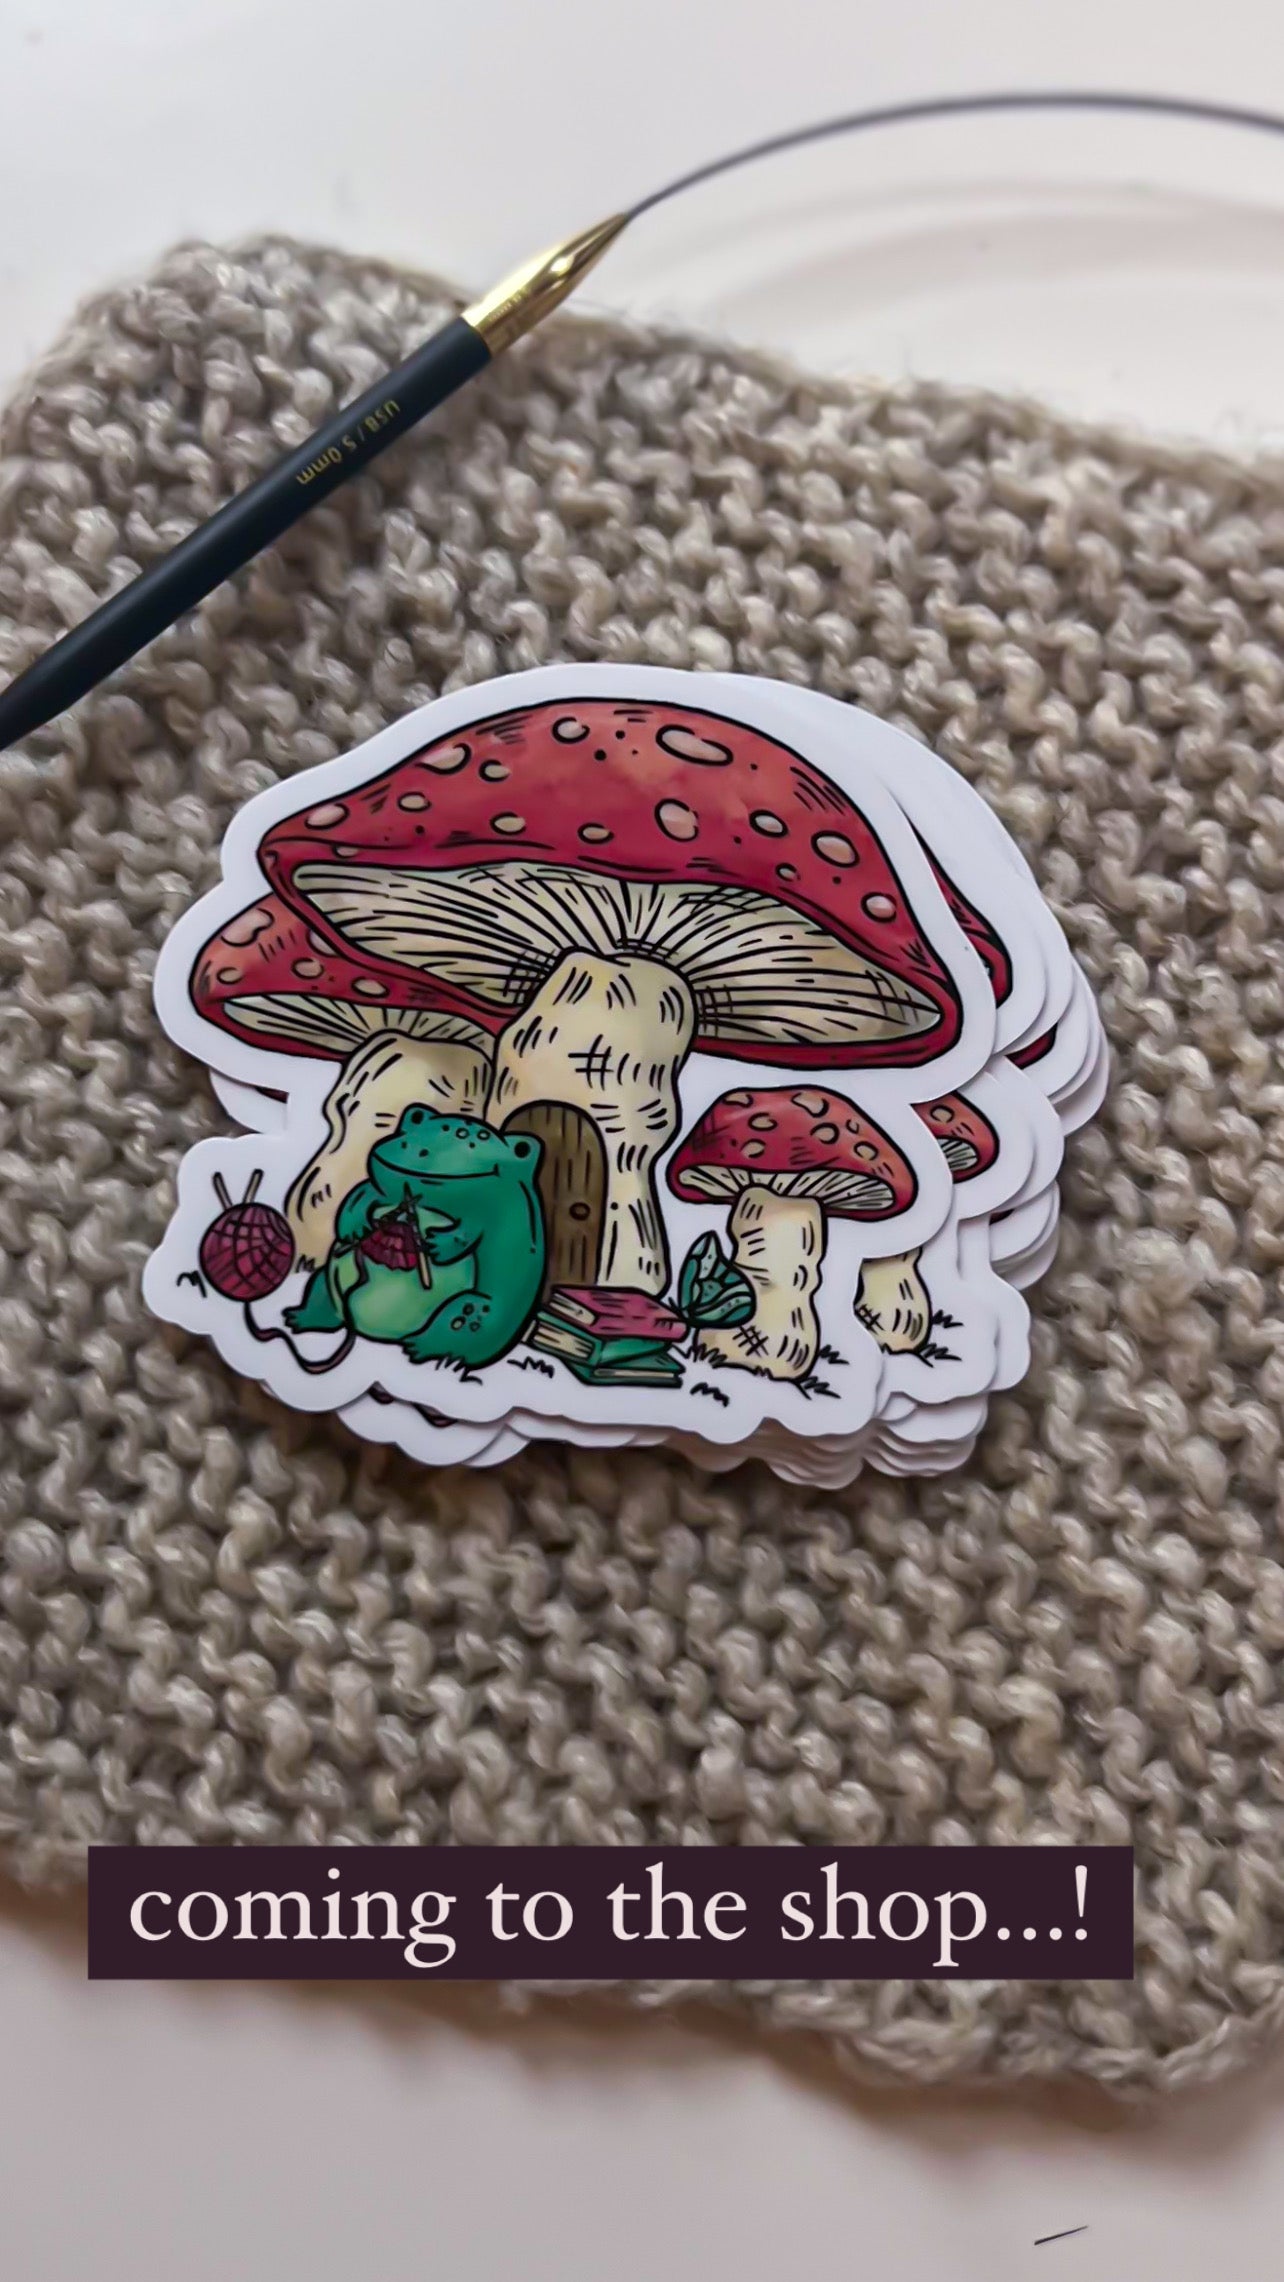 Knitting under a toadstool